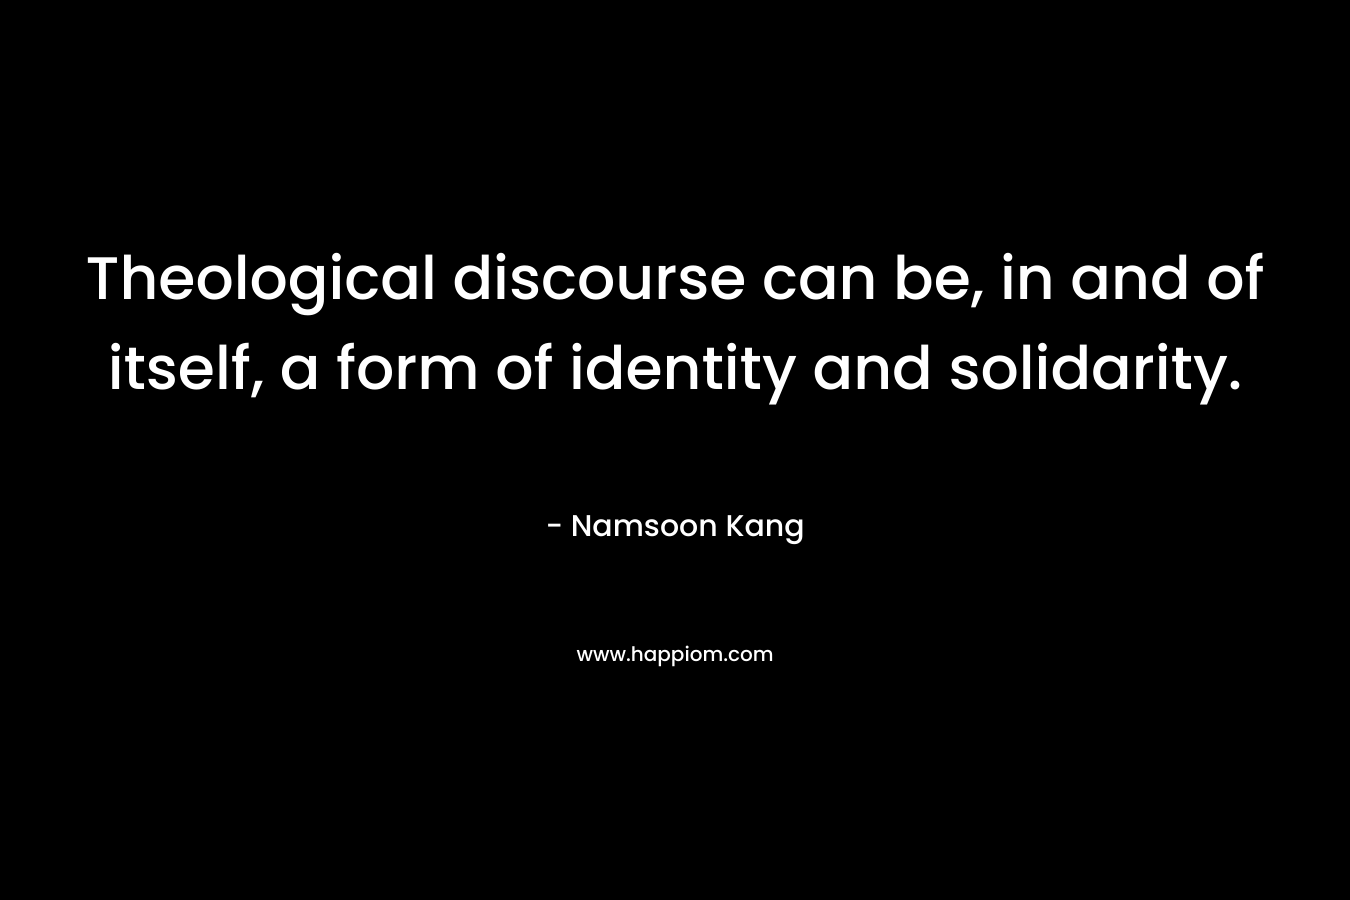 Theological discourse can be, in and of itself, a form of identity and solidarity. – Namsoon Kang